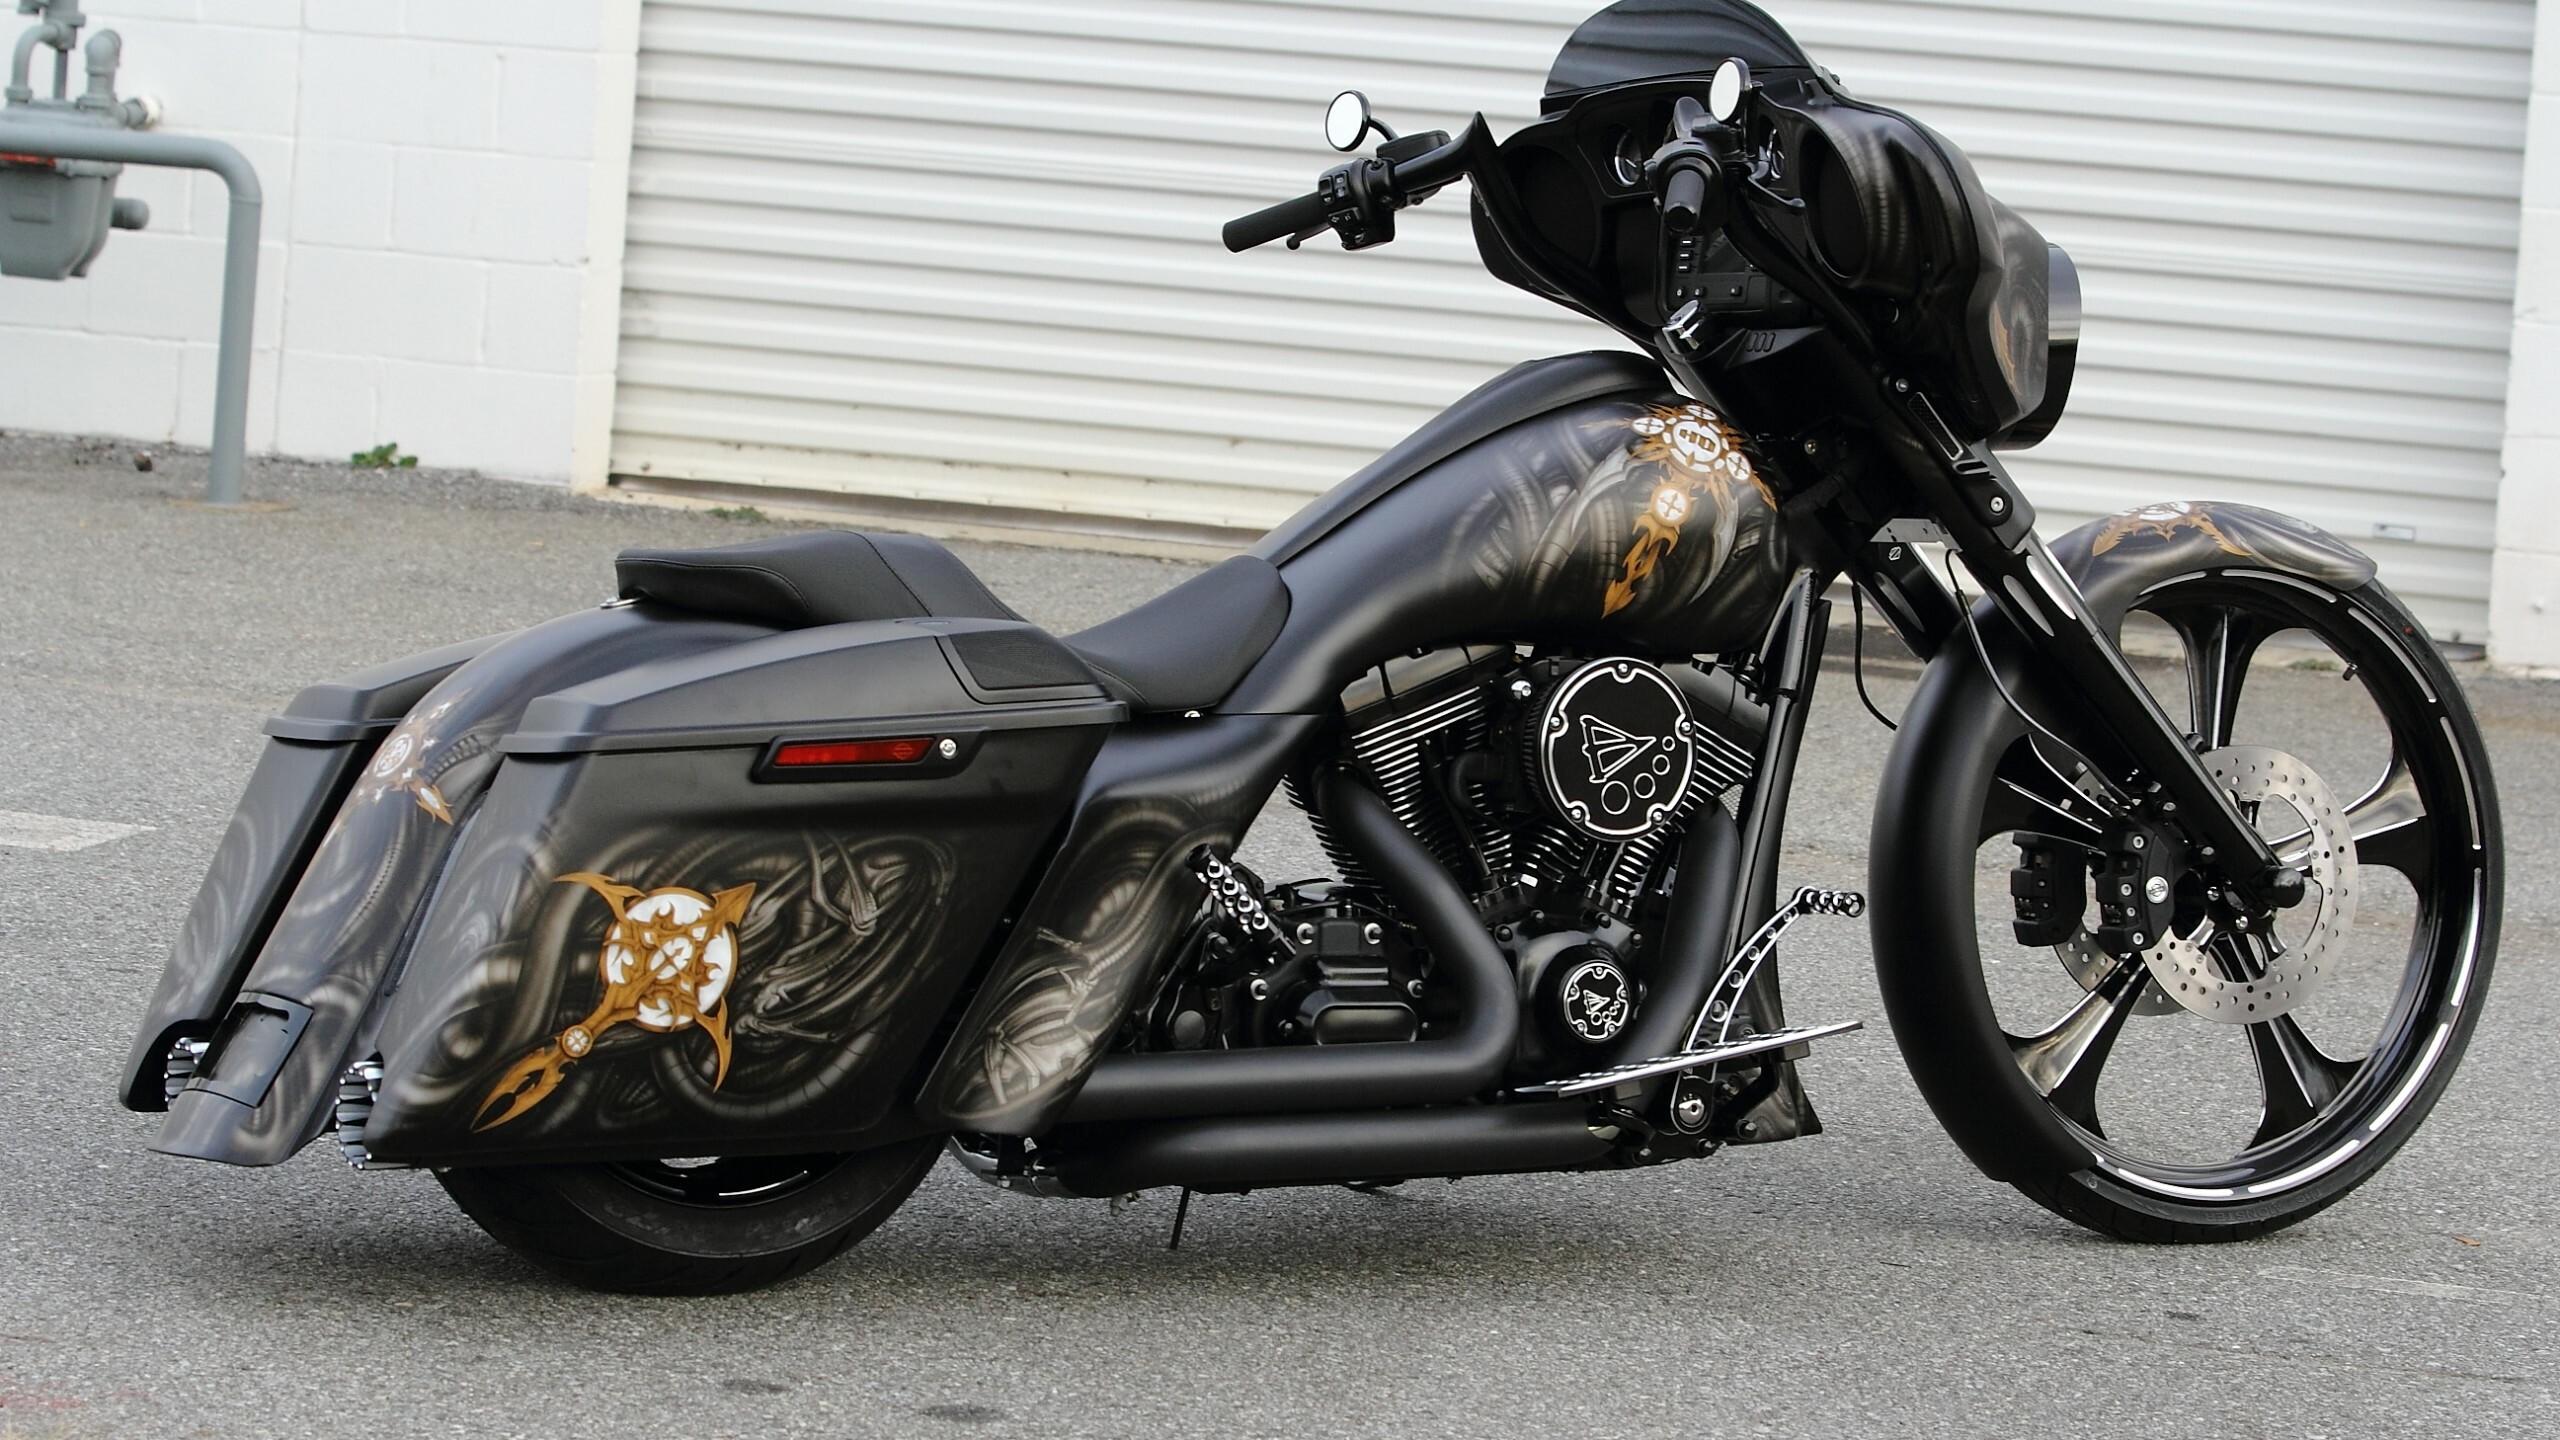 Harley-Davidson Glide: A touring model, An upright riding position and saddlebags. 2560x1440 HD Wallpaper.